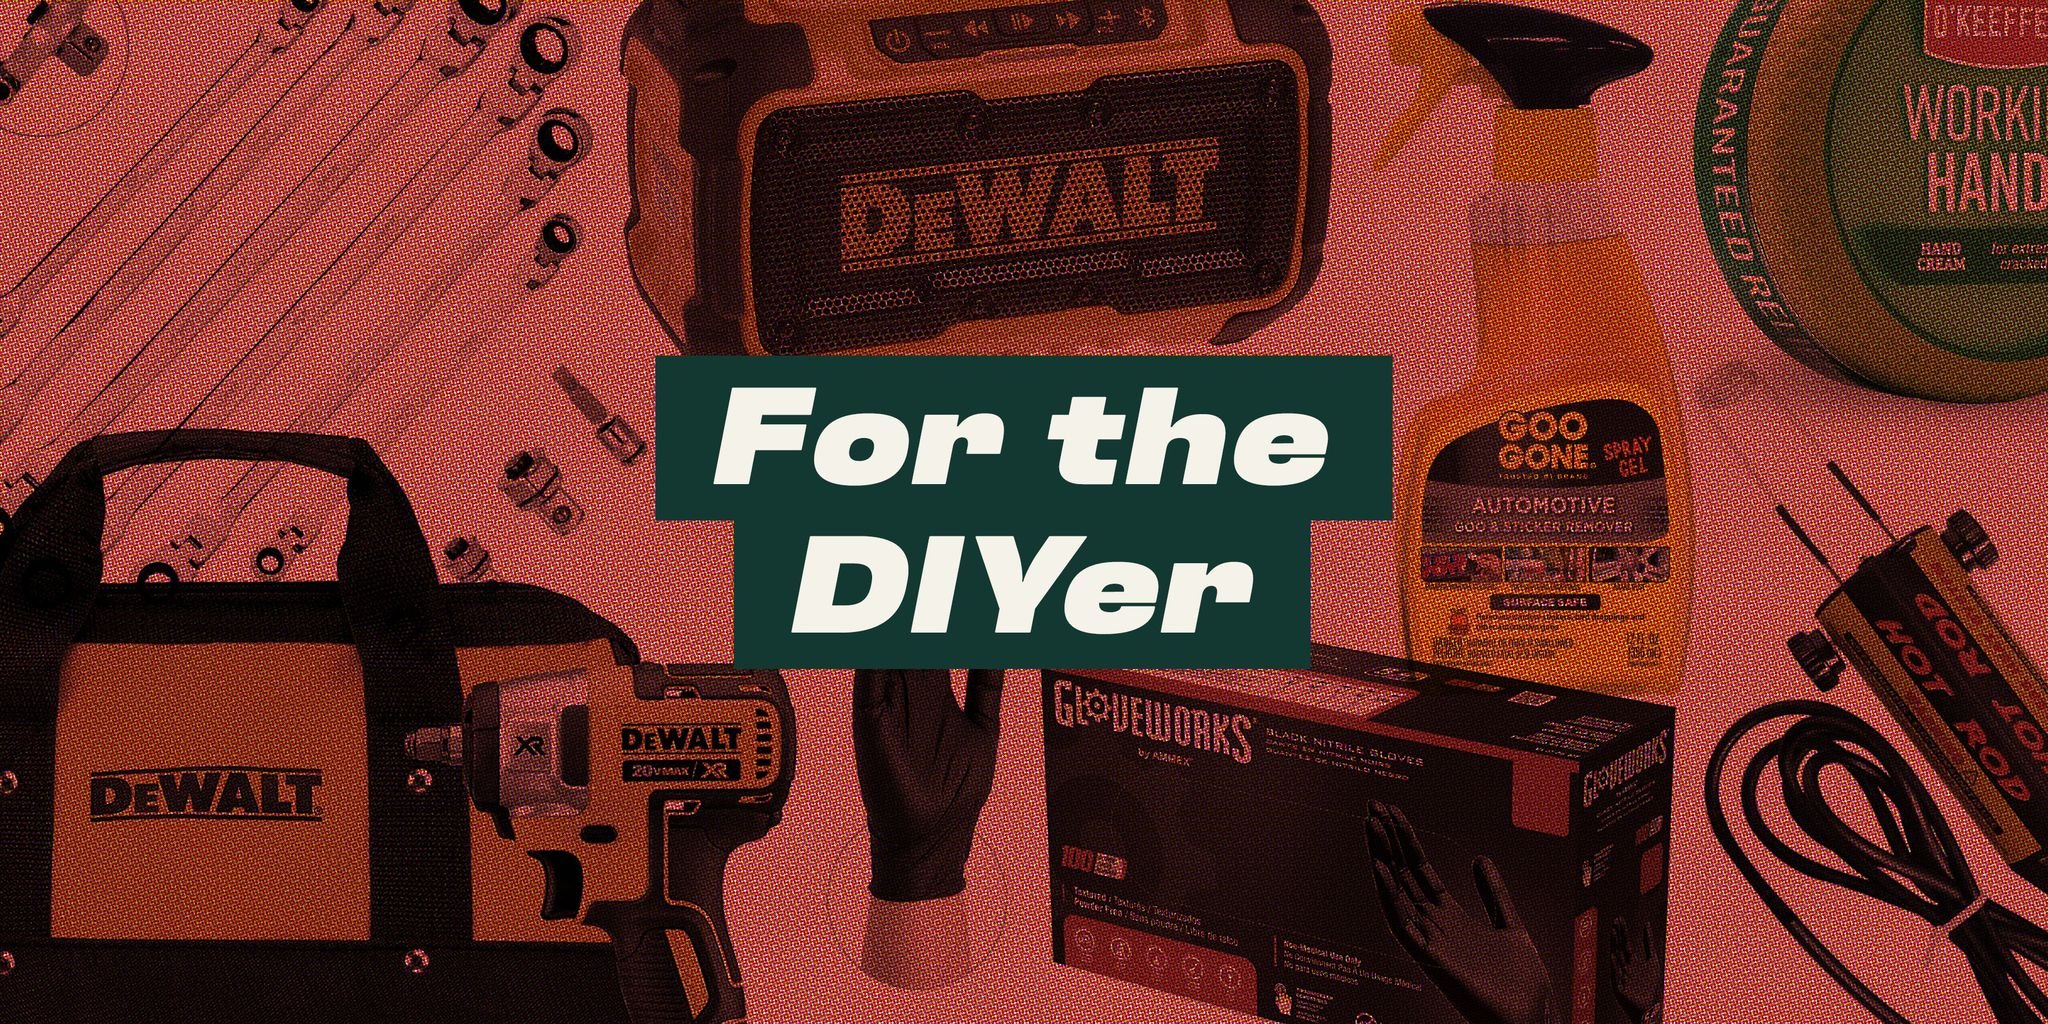 Tools and Garage Accessories That Are Ideal Holiday Gifts